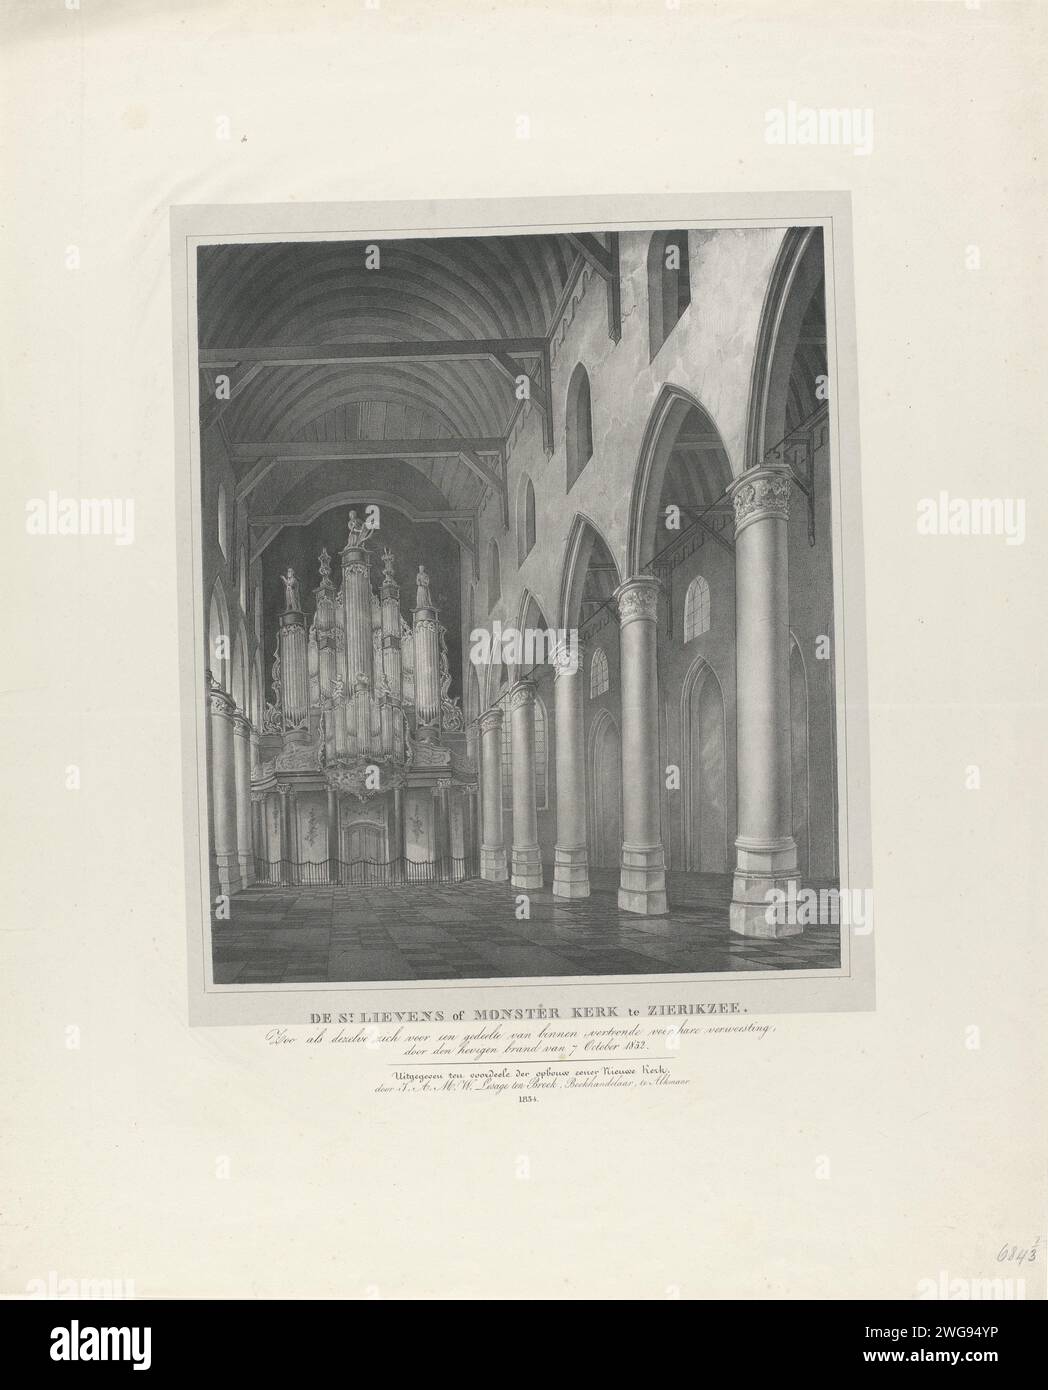 Interior of the Sint-Lievensmonsterkerk in Zierikzee, before the fire of 1832, 1834 print Interior of the Sint-Lievensmonsterkerk in Zierikzee, in Welstand, before the fire of October 6, 1832. Face from the interior towards the organ. The church has a wooden ceiling. On the right a side aisle, separated from the ship by columns. Print Maker: Netherlands Figter Print by: Zierikzeeprinter: Amsterdampublisher: Alkmaar paper  parts of church interior. church organ Sint-Lievensmonsterkerk Stock Photo